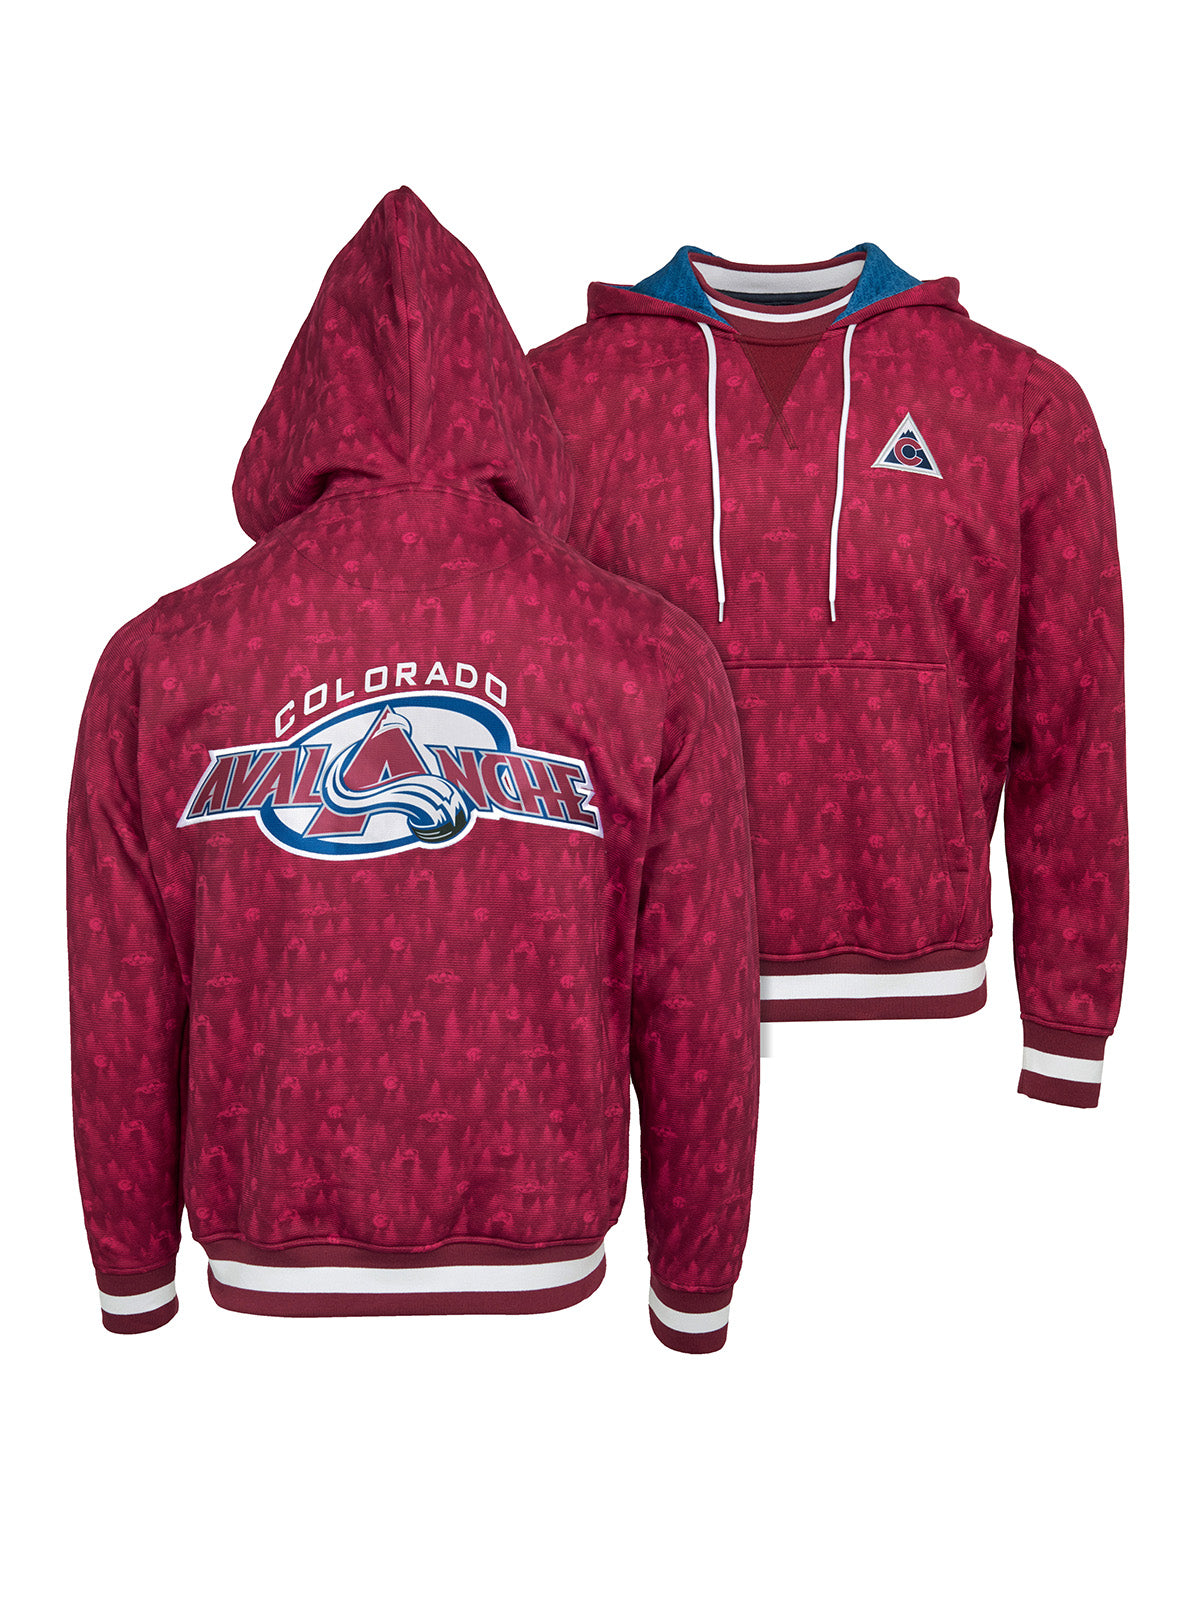 Colorado Avalanche Hoodie - Show your team spirit, with the iconic team logo patch on the front and back, and proudly display your Colorado Avalanche support in their team colors with this NHL hockey hoodie.